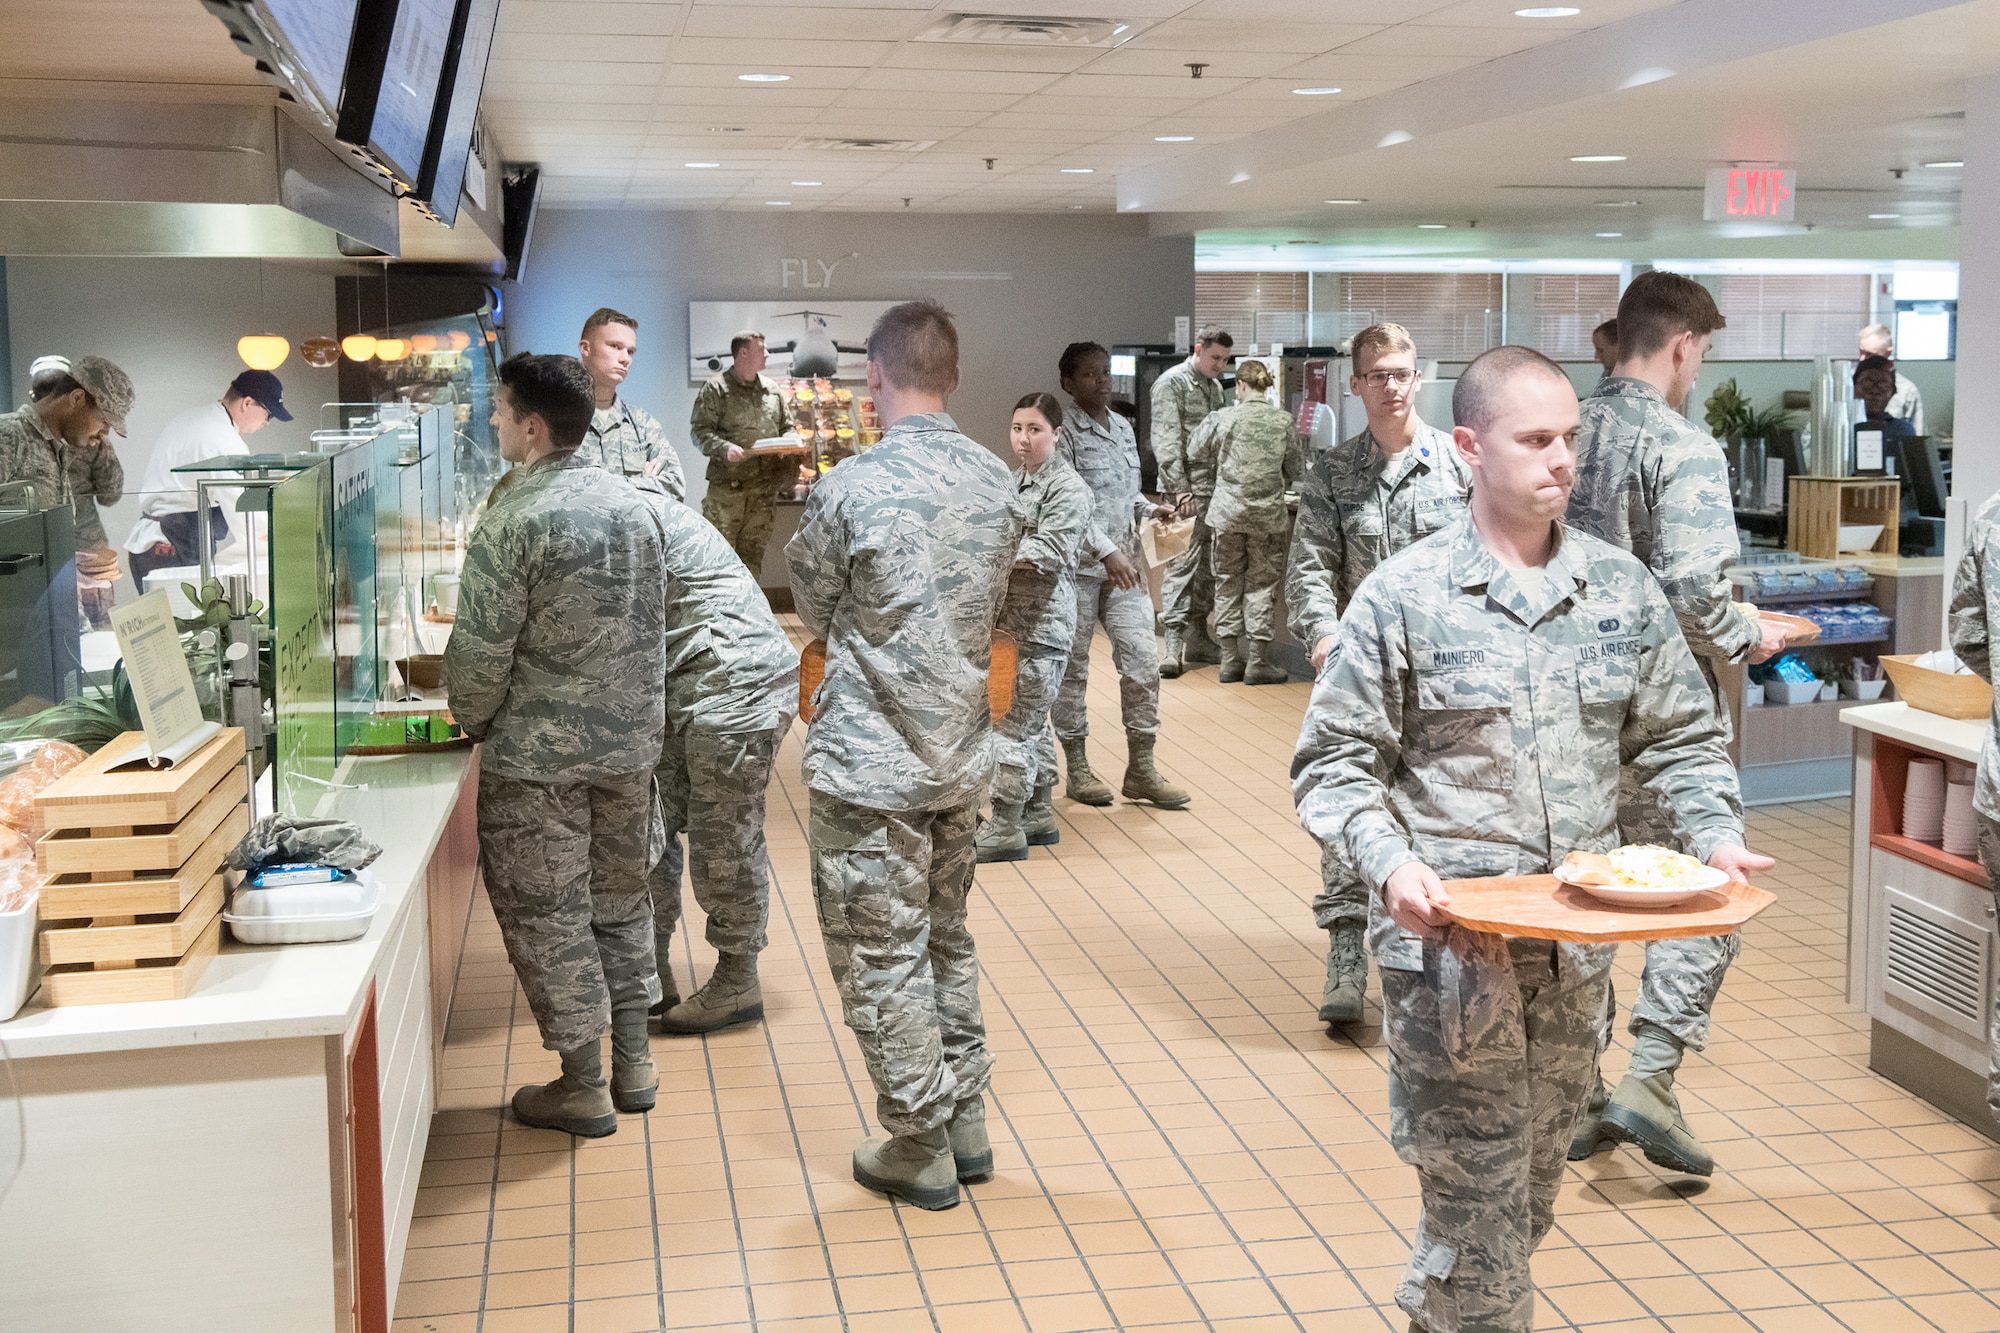 Airmen grab lunch June 11, 2019, at the Patterson Dining Facility, Dover Air Force Base, Del. The Patterson DFAC serves roughly 700-800 people daily, mostly during lunch. (U.S. Air Force photo by Mauricio Campino)